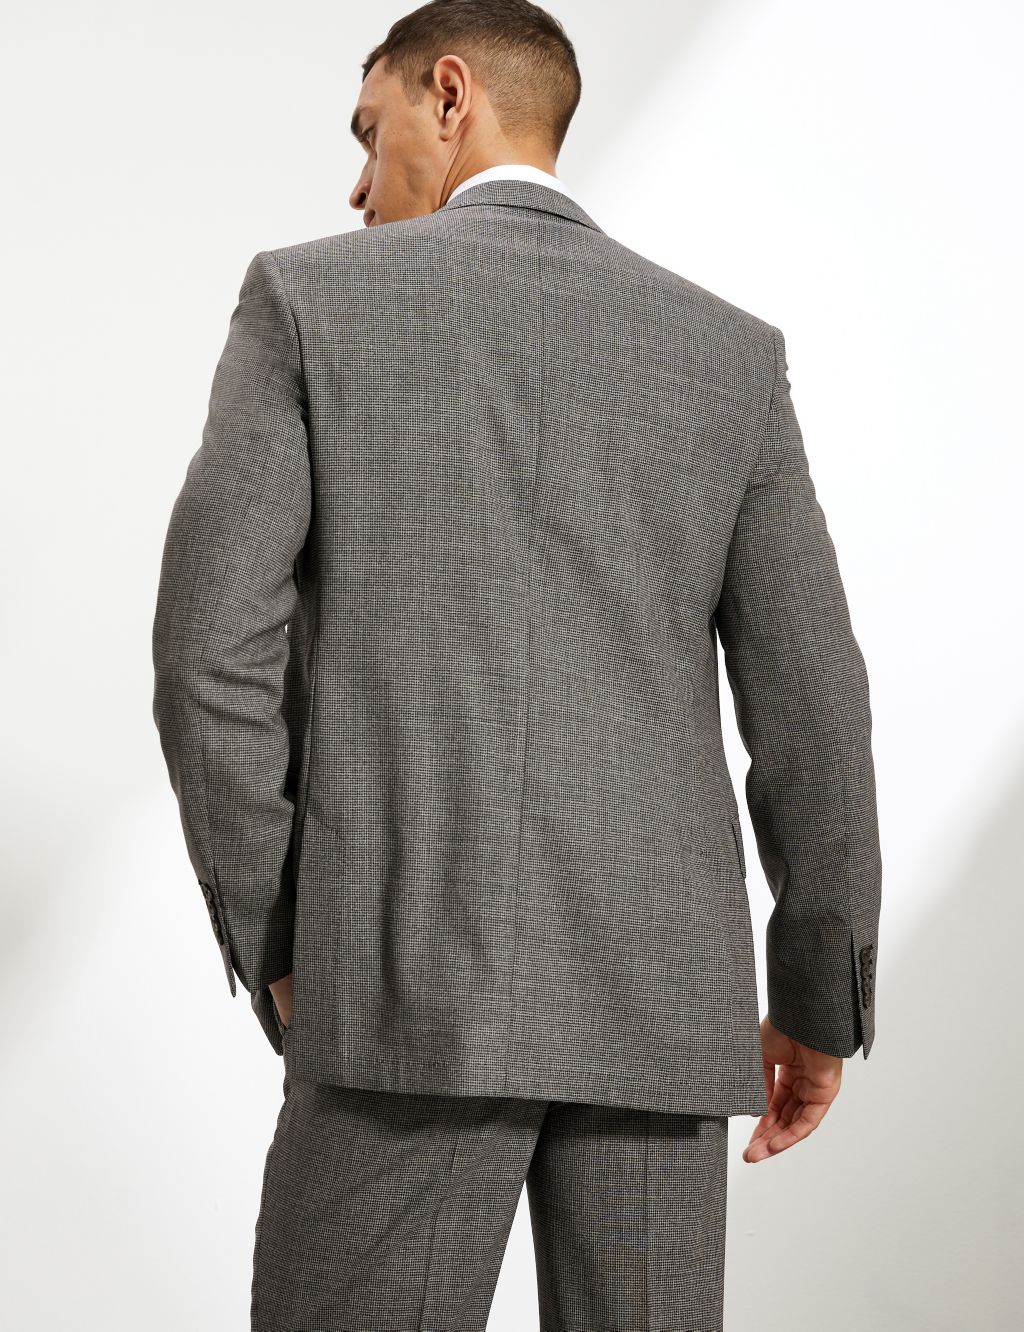 Tailored Fit Bi-Stretch Puppytooth 2 Piece Suit image 3